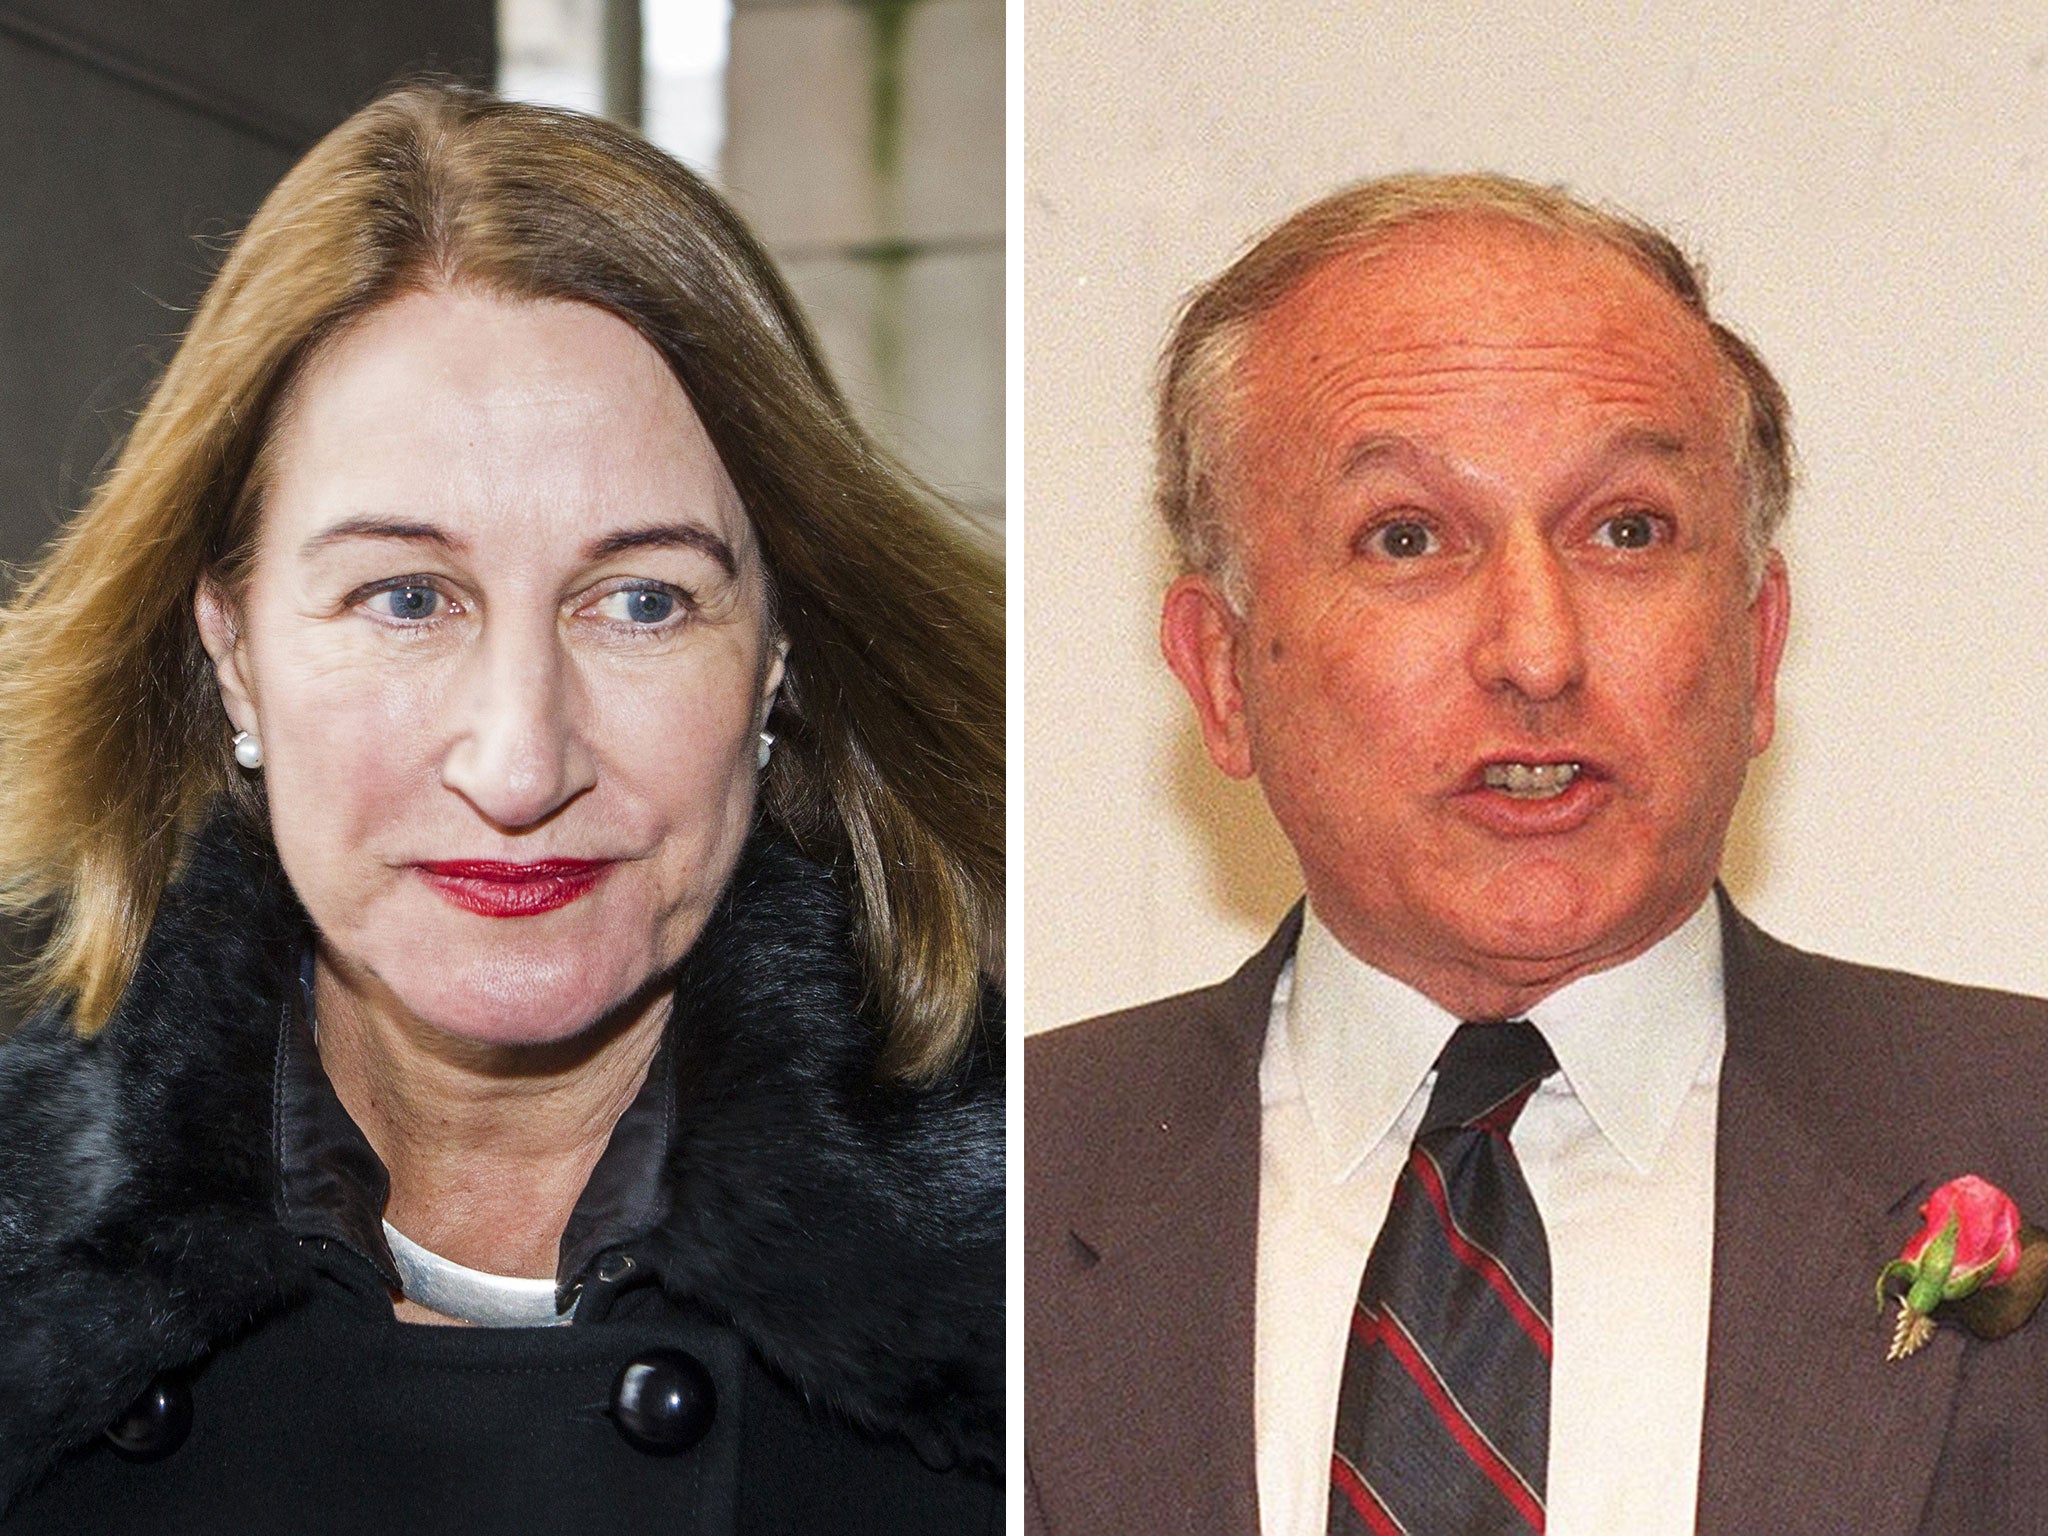 Justice Lowell Goddard is to investigate child sex abuse allegations against Lord Greville Janner